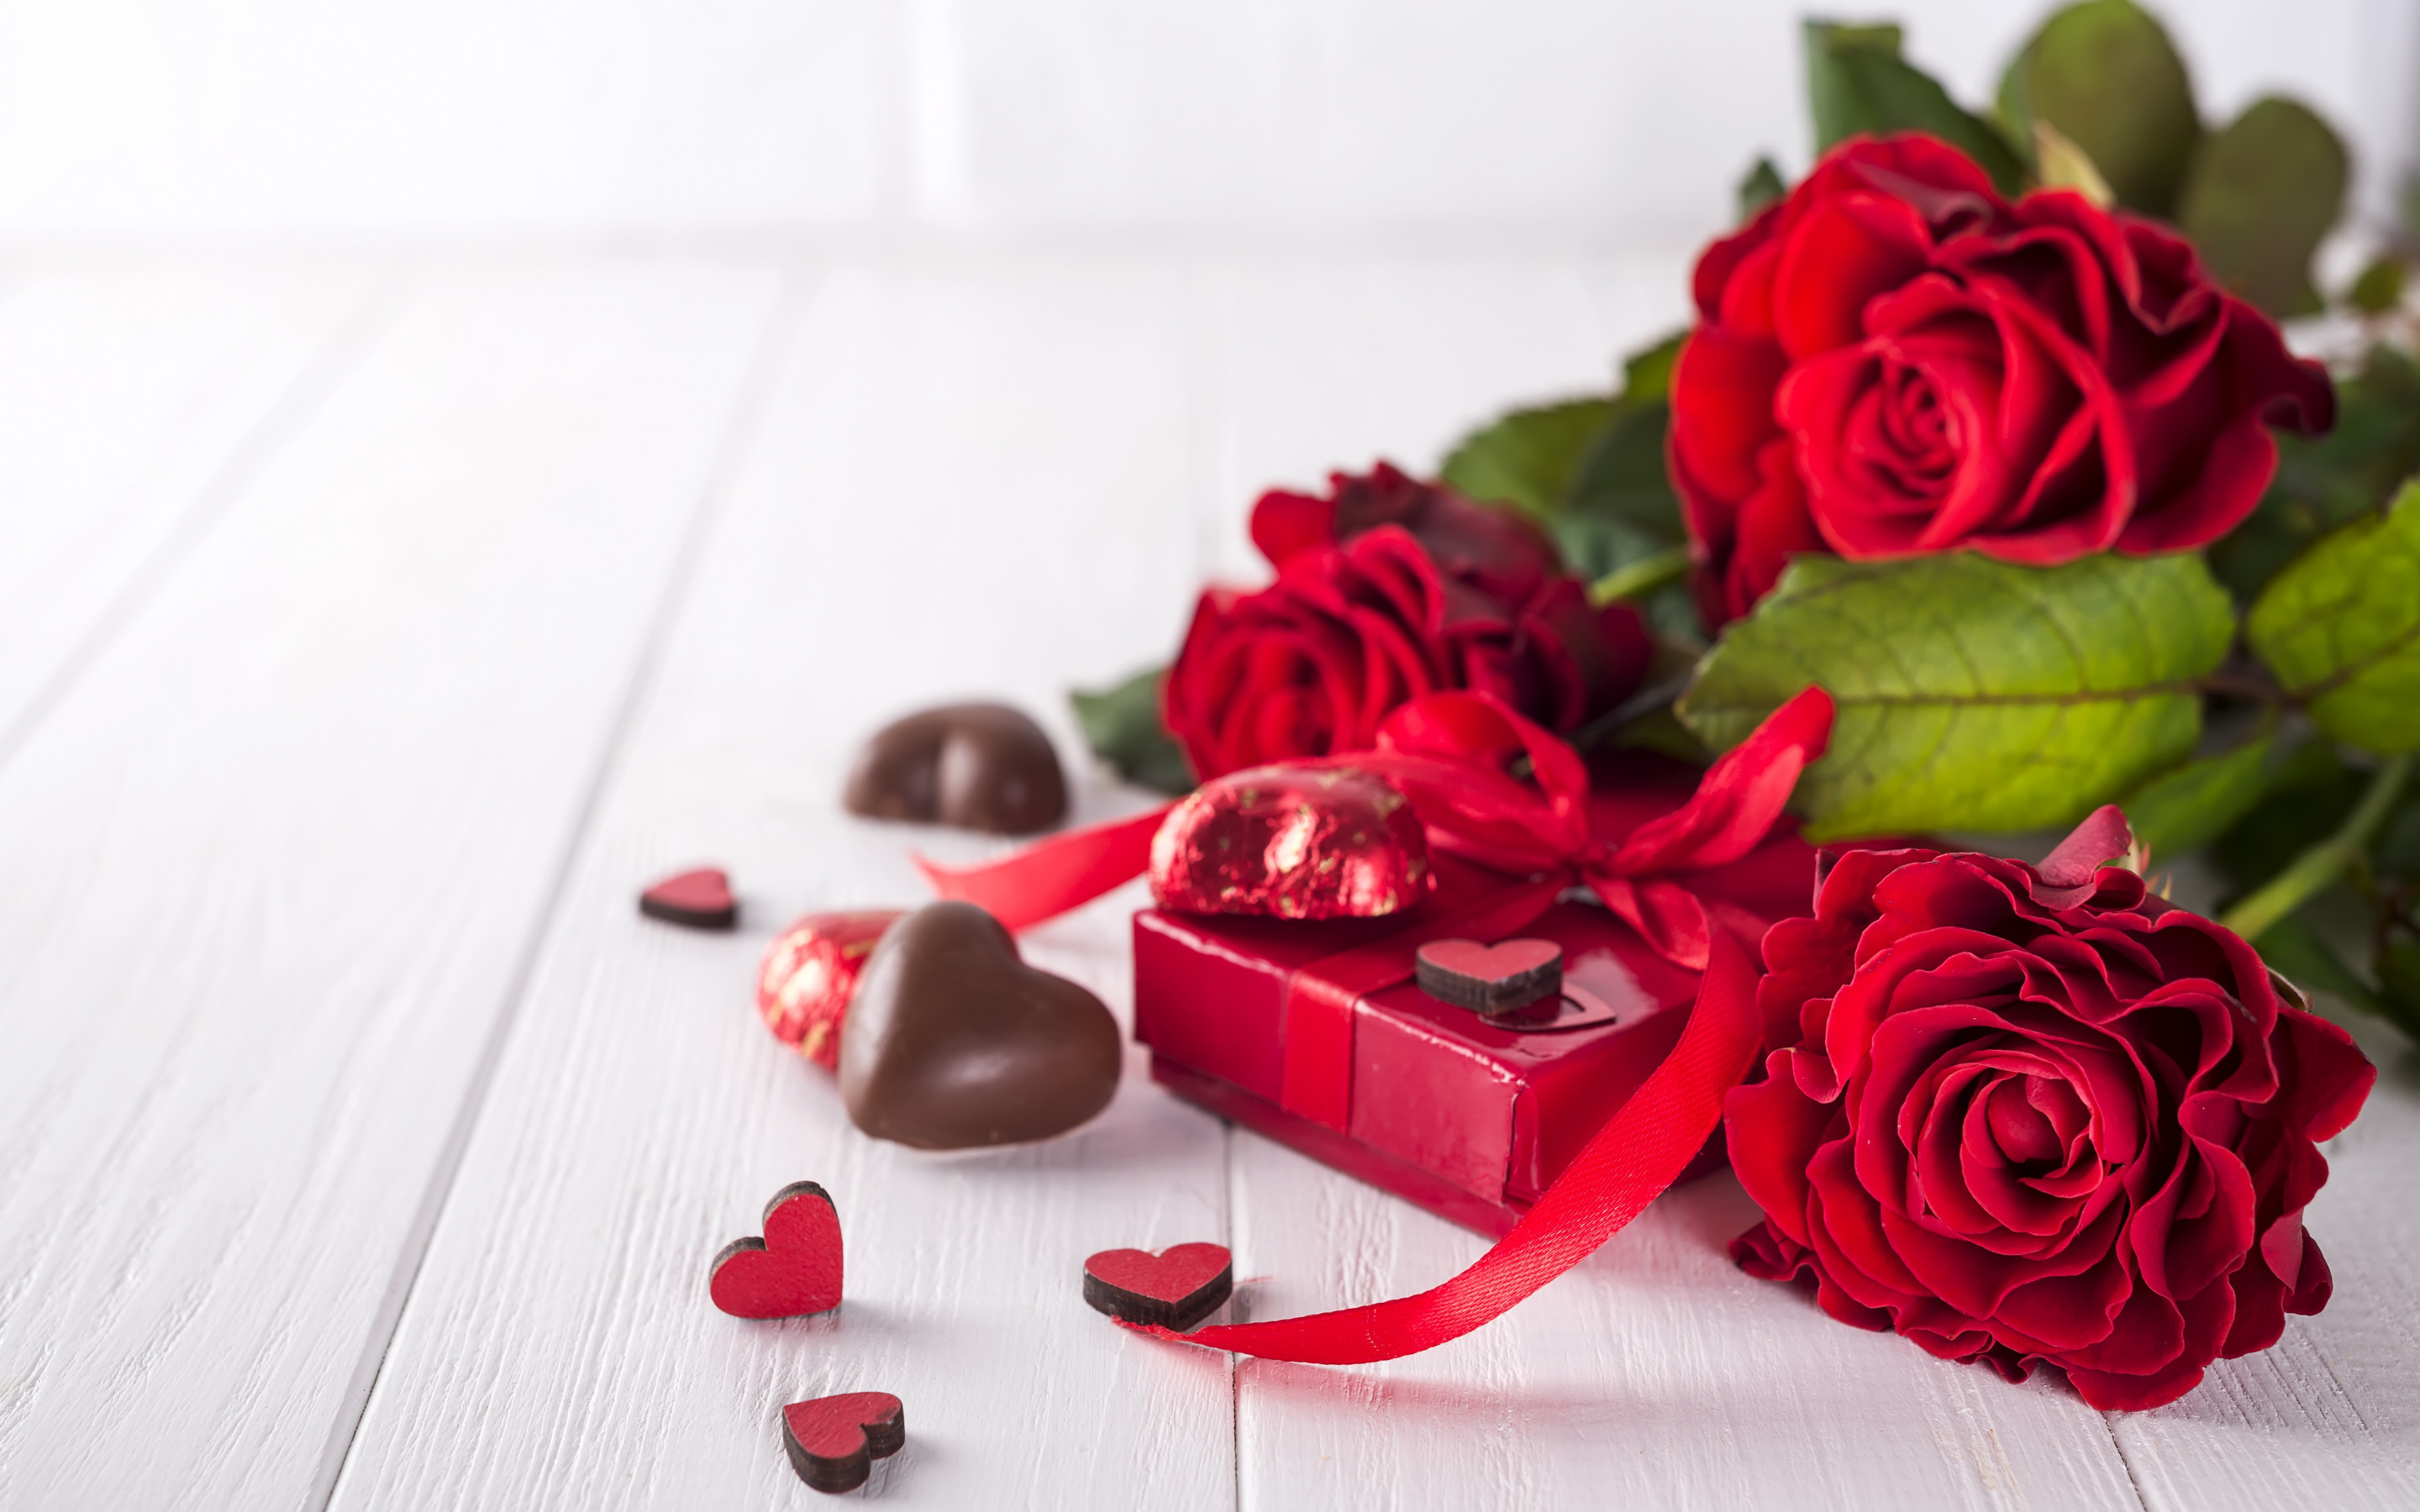 Download wallpapers Valentines Day, February 14, red roses, candies ...